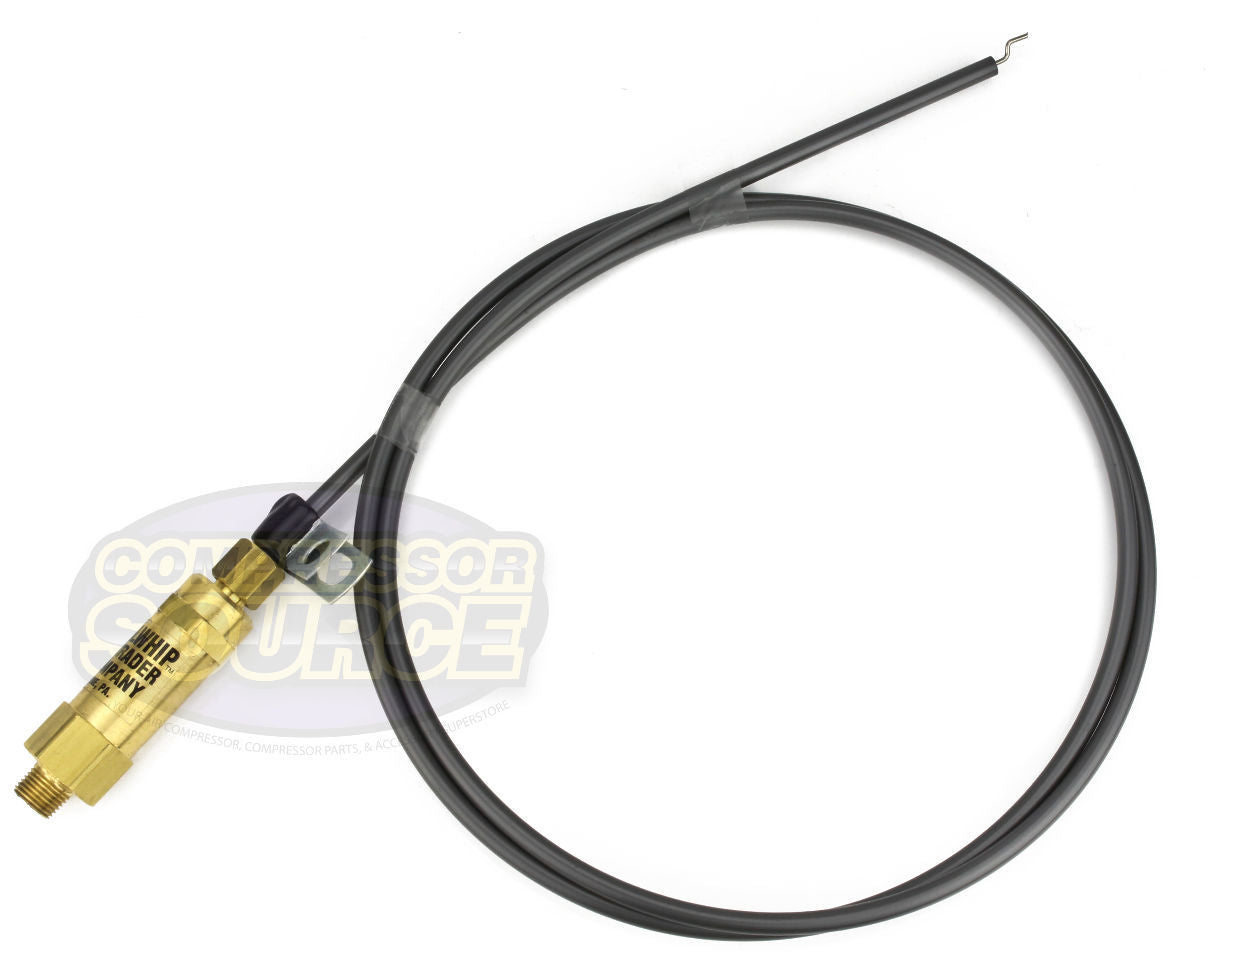 24" Inch Bullwhip Throttle Control Cable For Gas Air Compressors